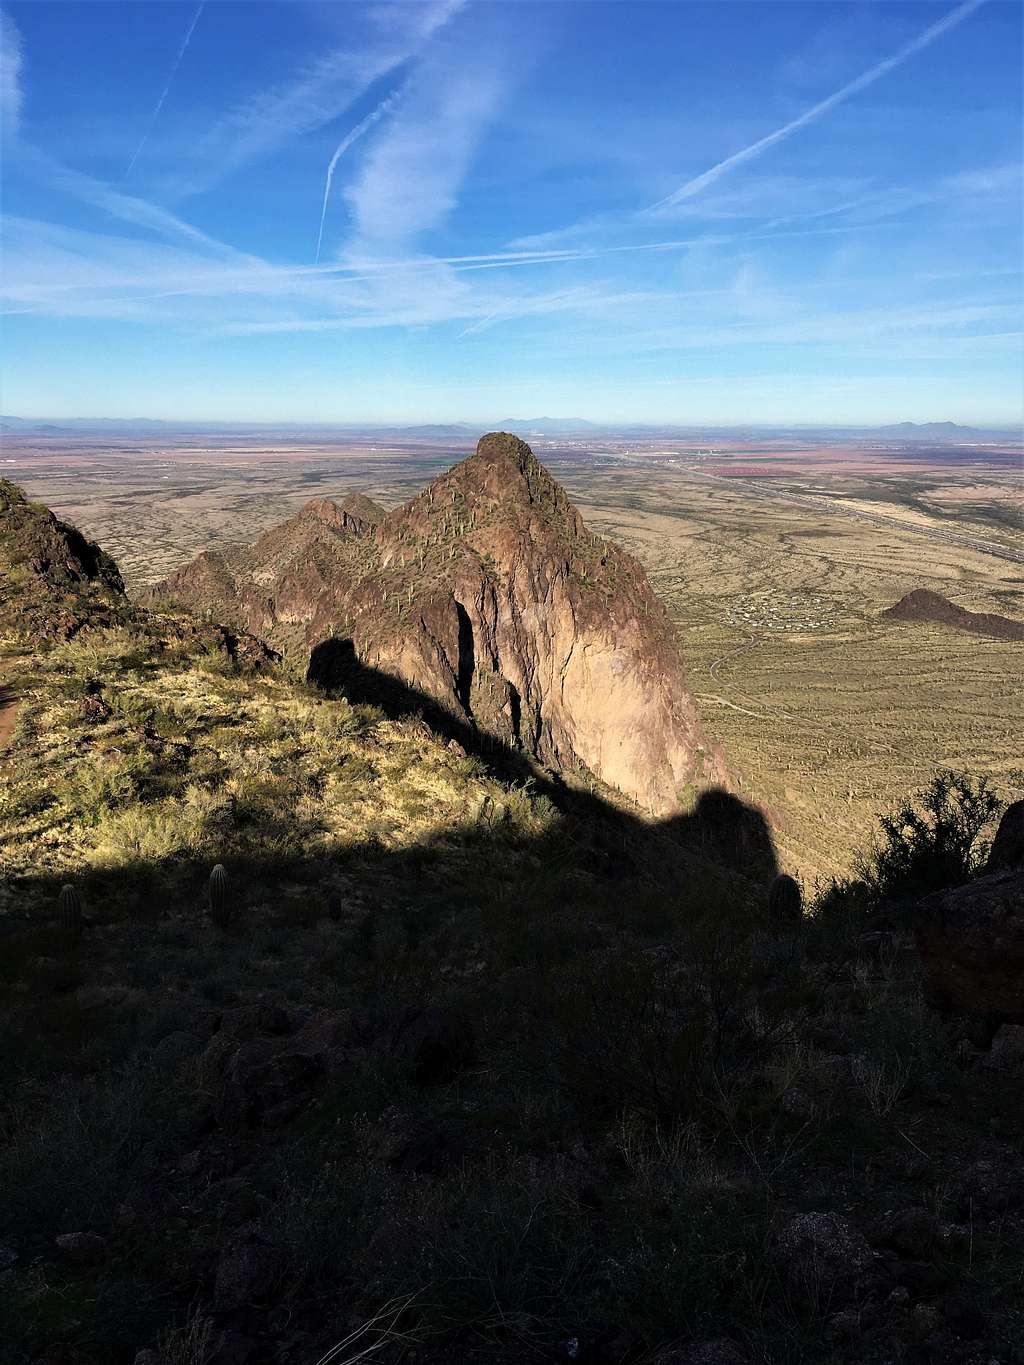 View down to Razorback Ridge from high up on Picacho Peak